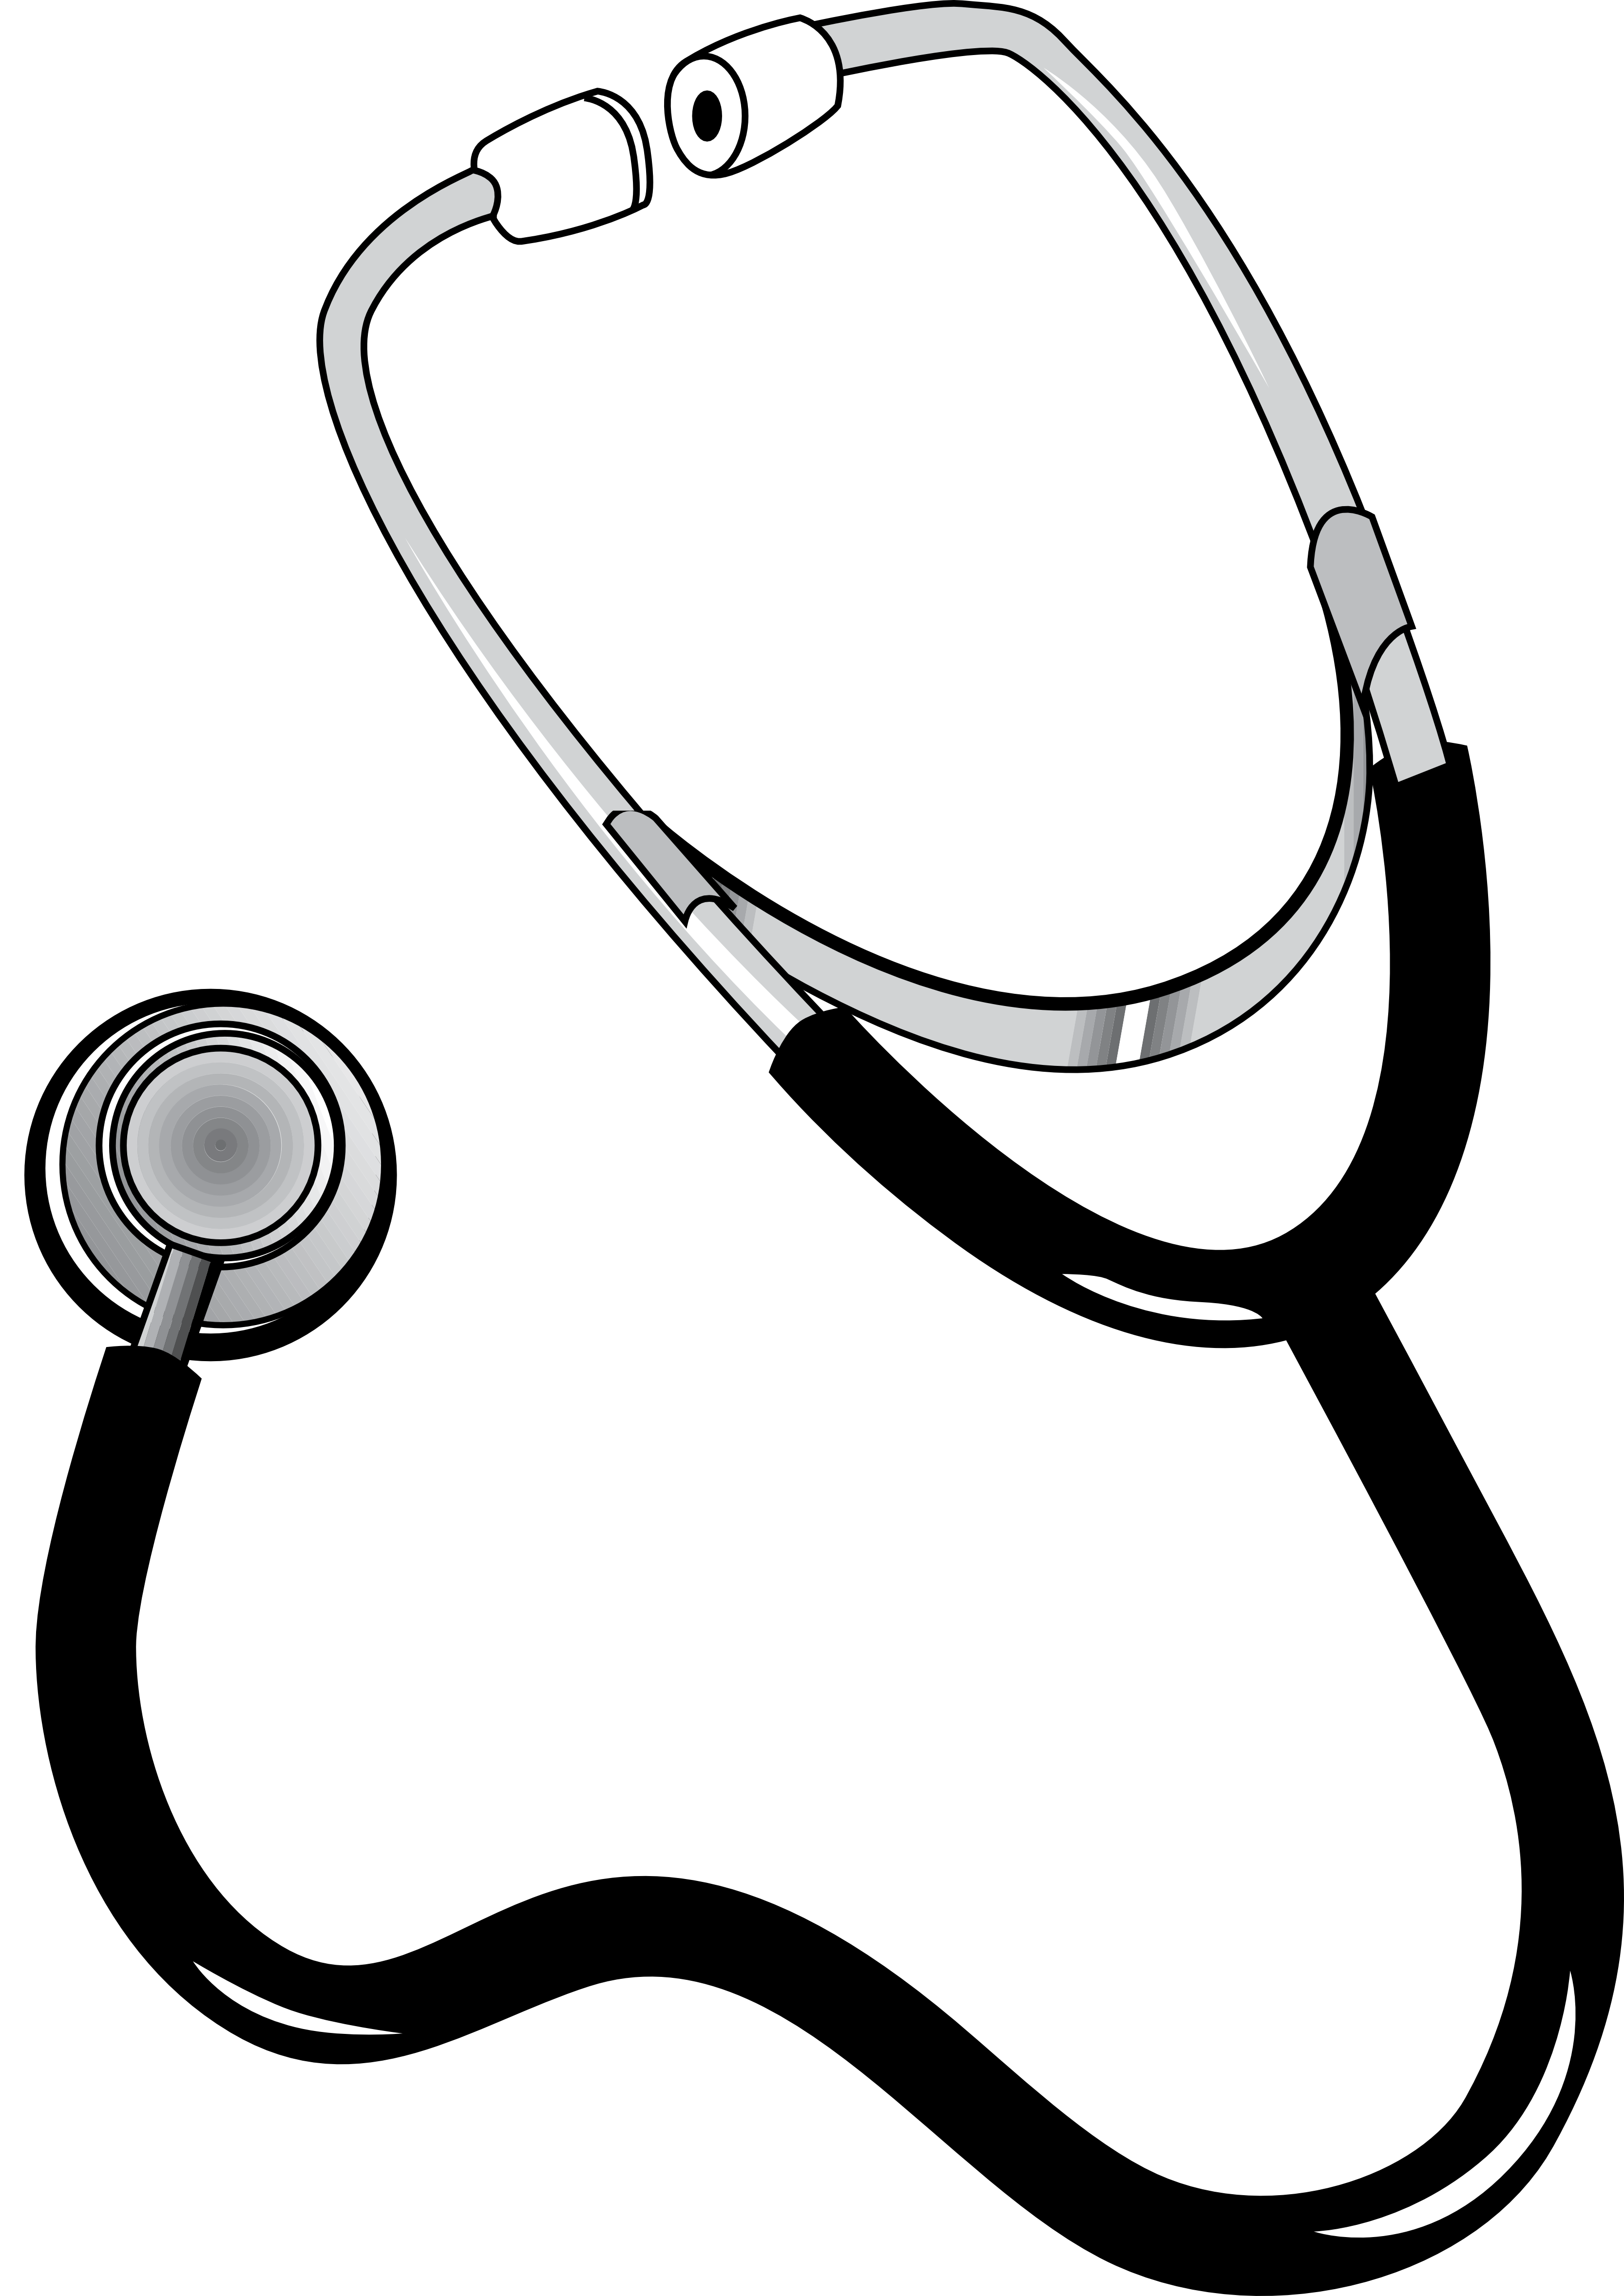 Stethoscope Black White Line Art Coloring Book Colouring Px   Free